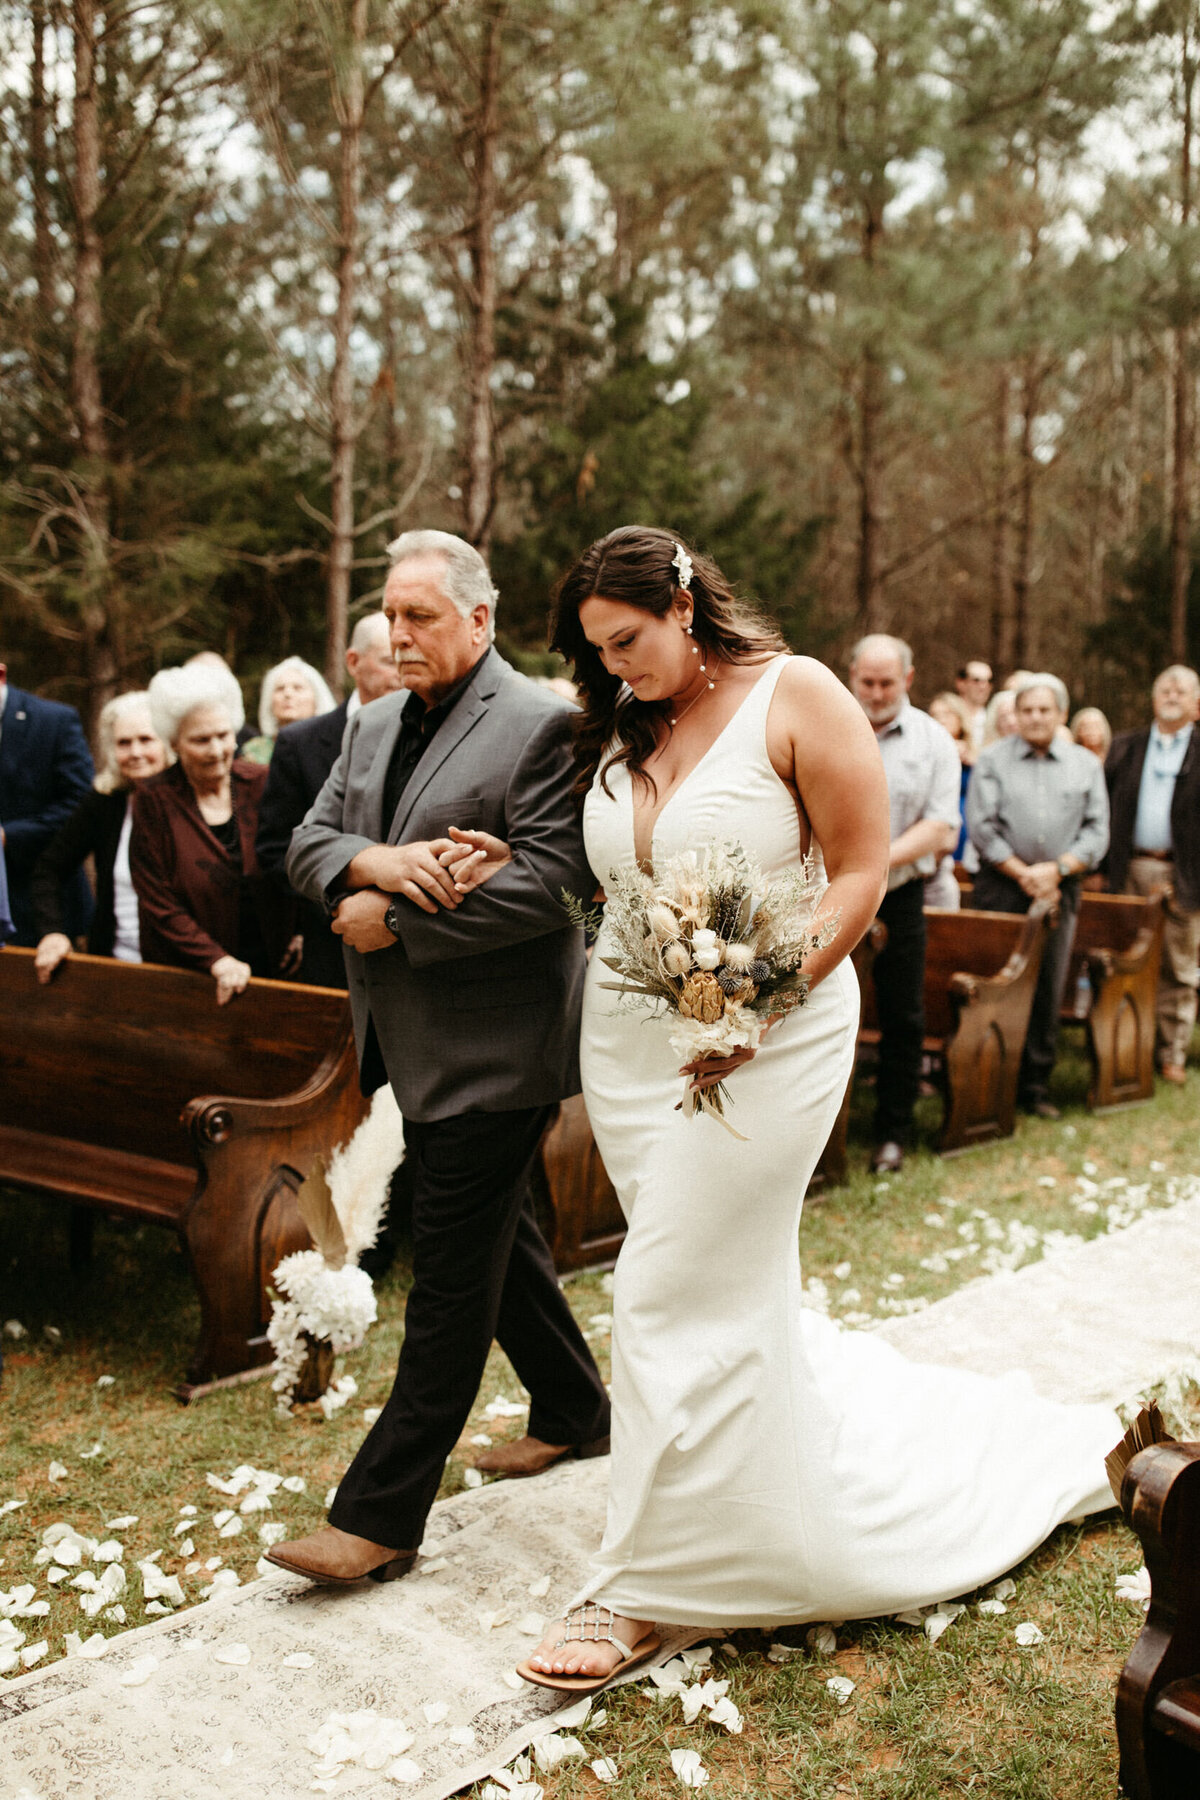 Father walking his daughter down the aisle during an outdoor ceremony in the woods with vintage rugs under them and wooden pews behind them